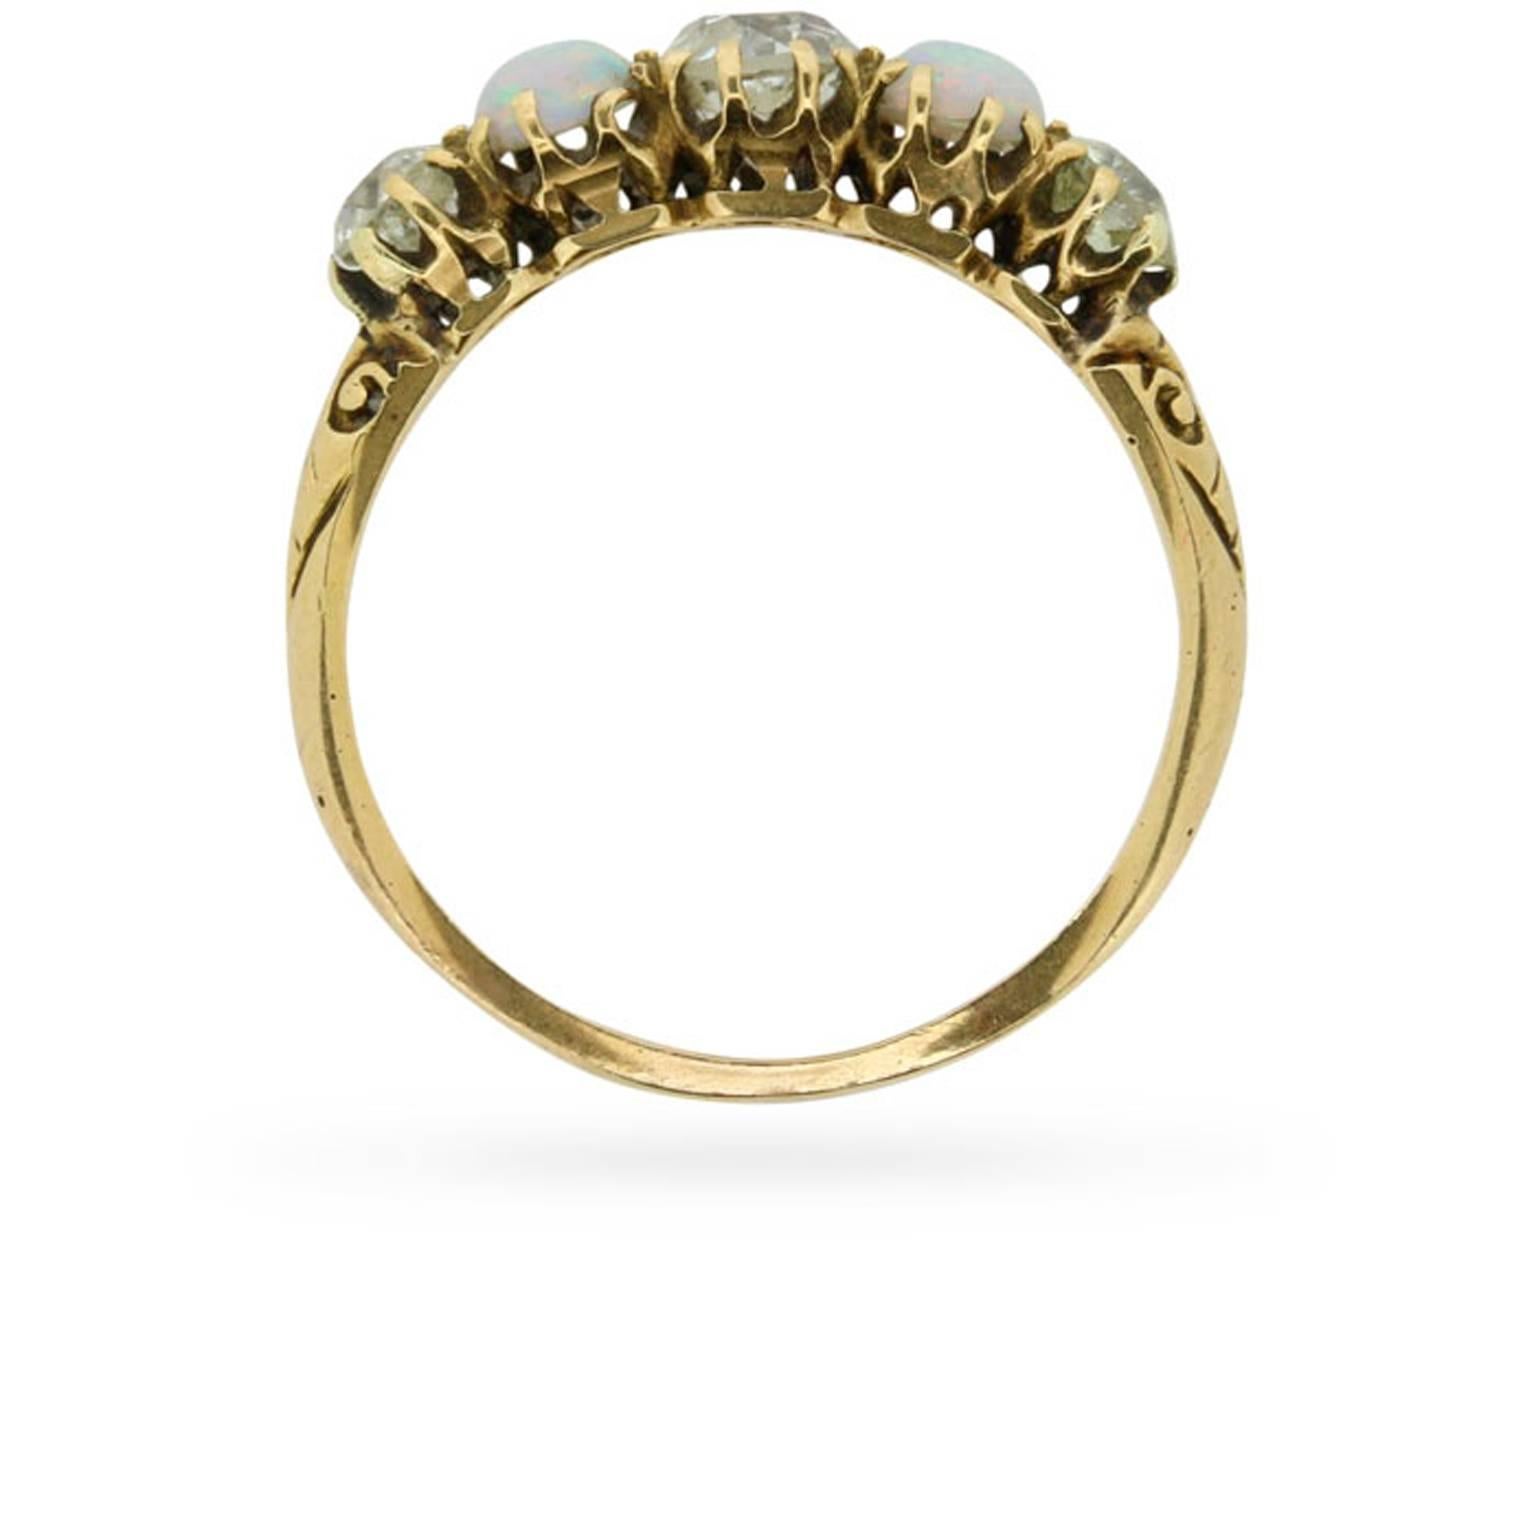 This five stone ring dating from the 1910s centres an old cut diamond between a magical pair of cabochon cut opals. One further old cut diamond set at each shoulder completes this beautiful quintet of antique stones.

The ring’s original, handmade,